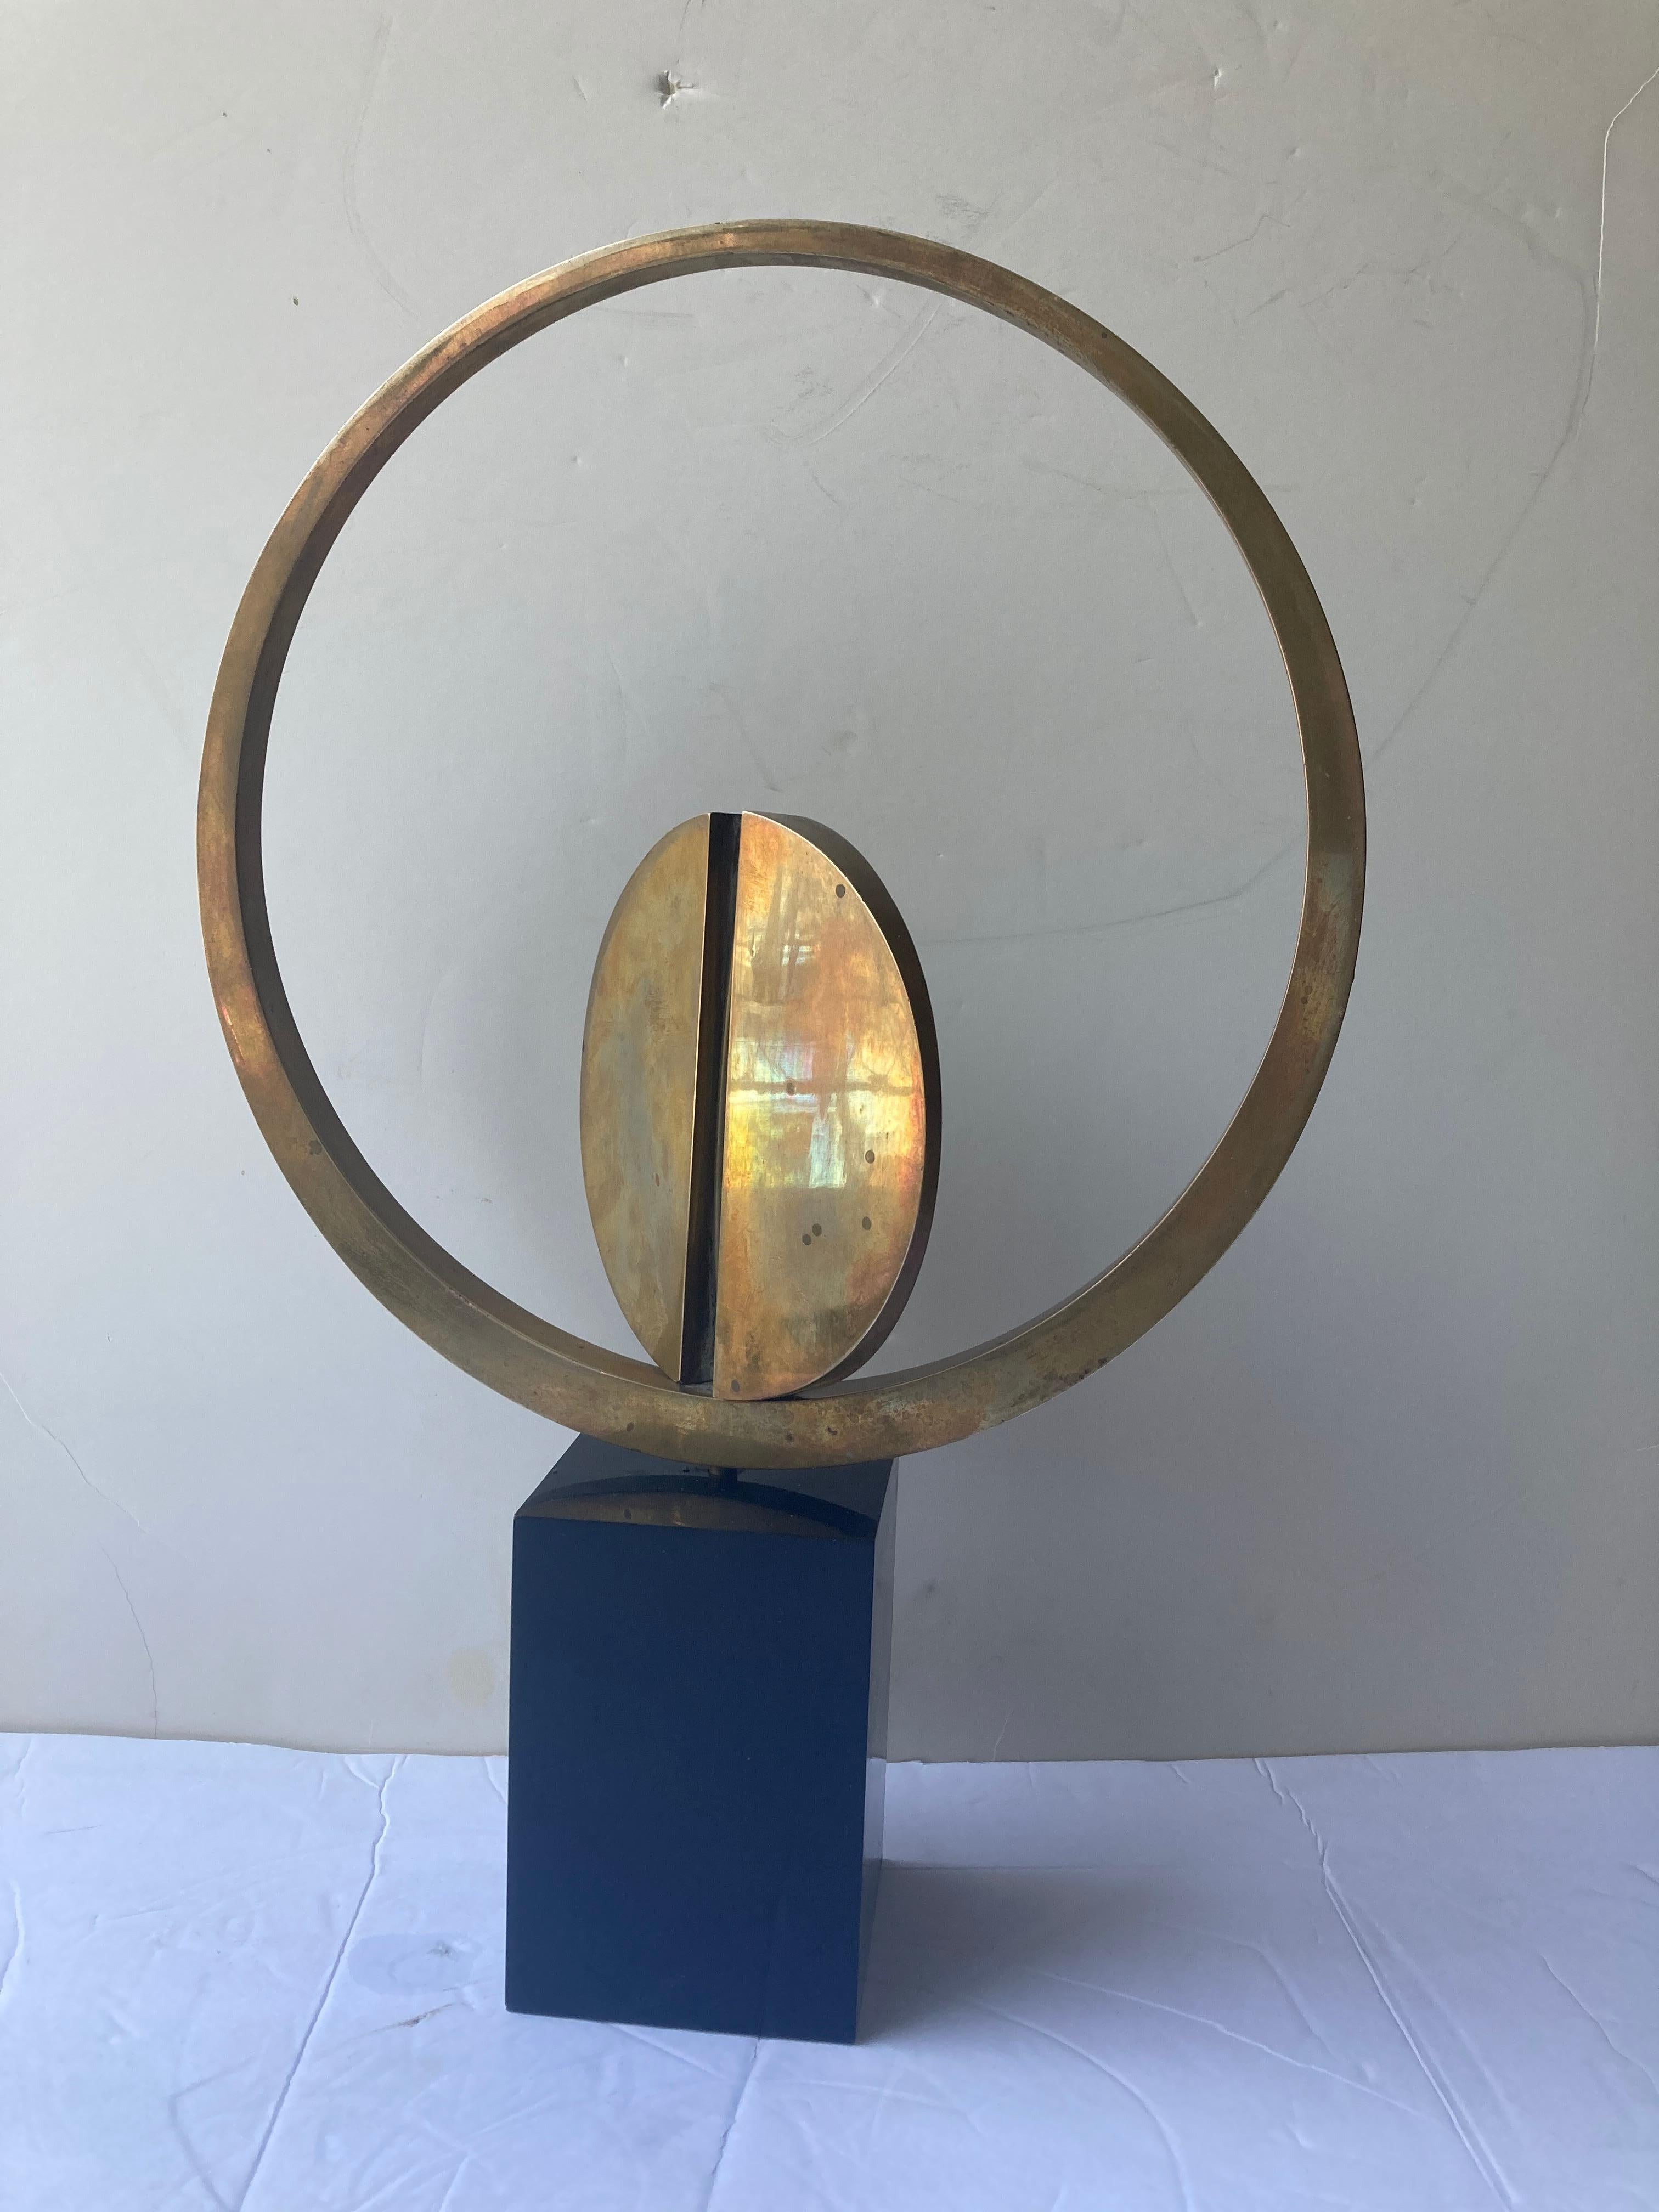 Traditional style sculpture for the well known Italian artist Carmelo Cappello. This is signed and dated 37/99 and 1978. The work shows patina of age and the work seats lose on the base. As kinetic.